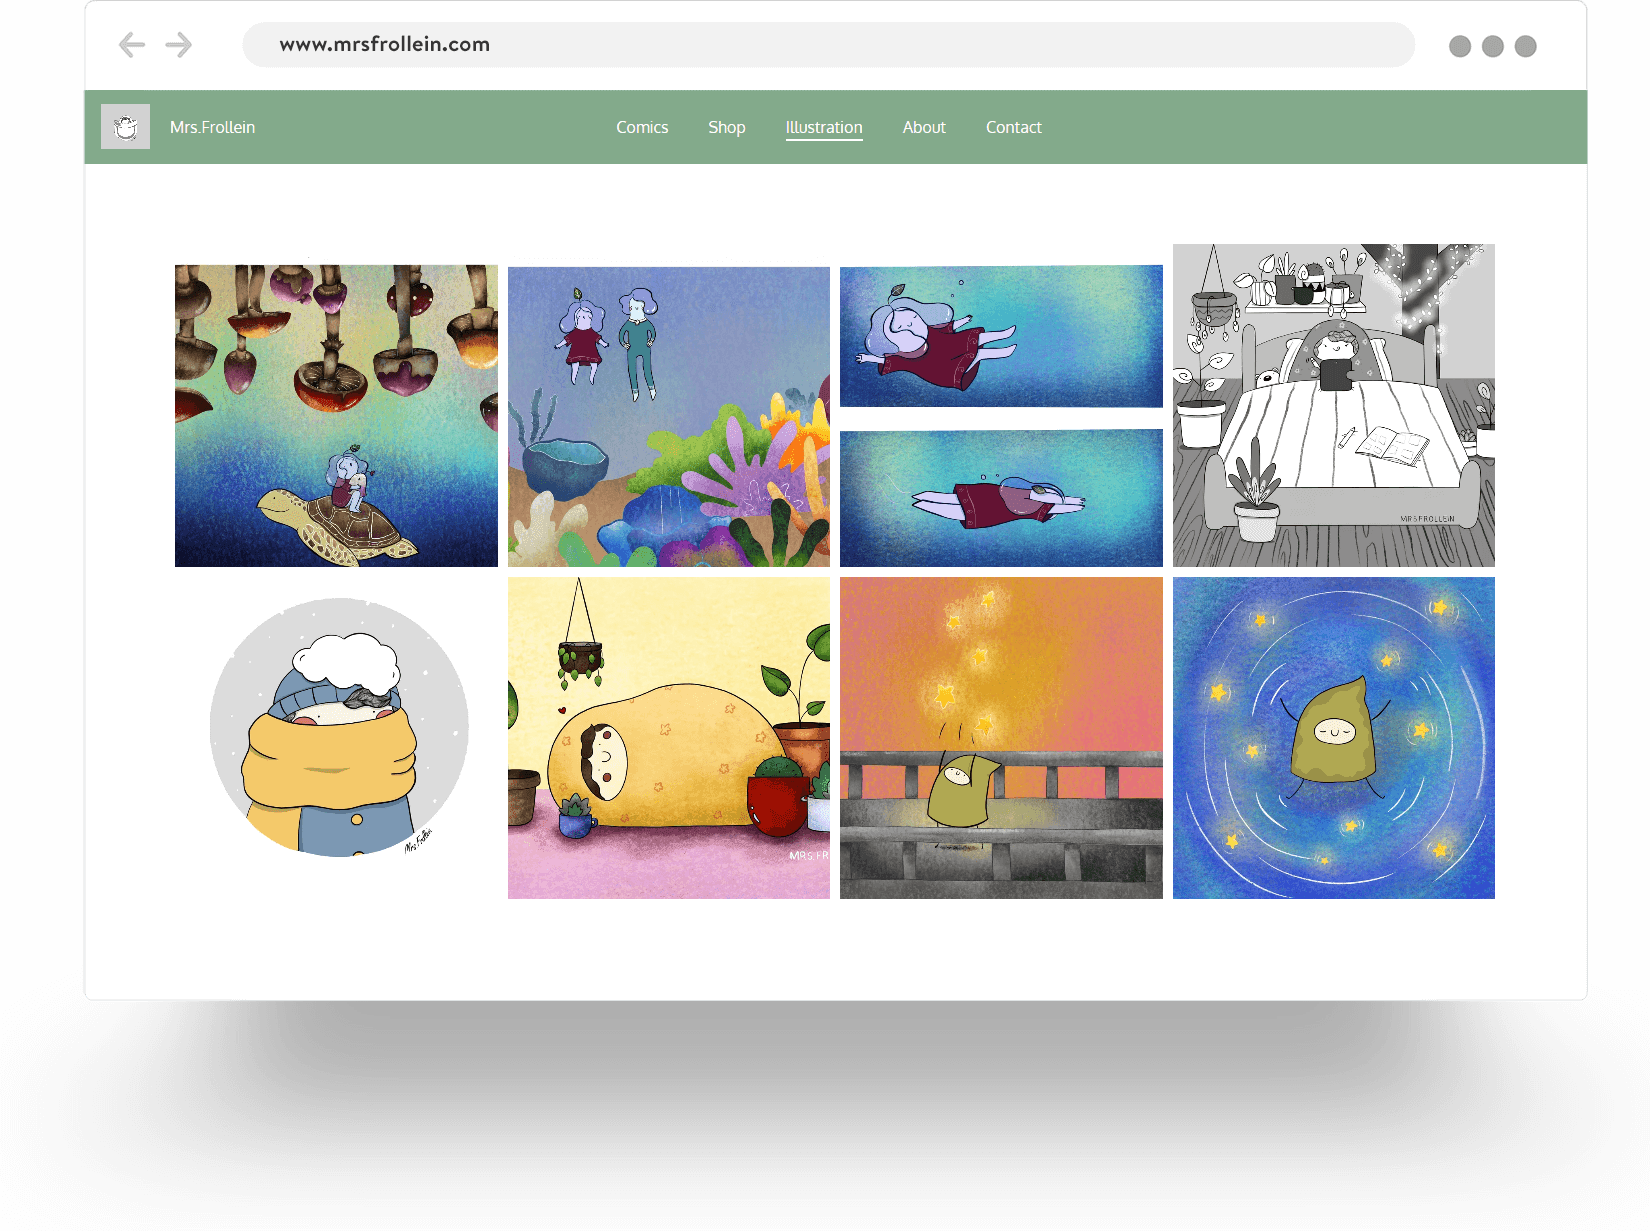 Example of a gallery page from an illustrator portfolio website built with Jimdo